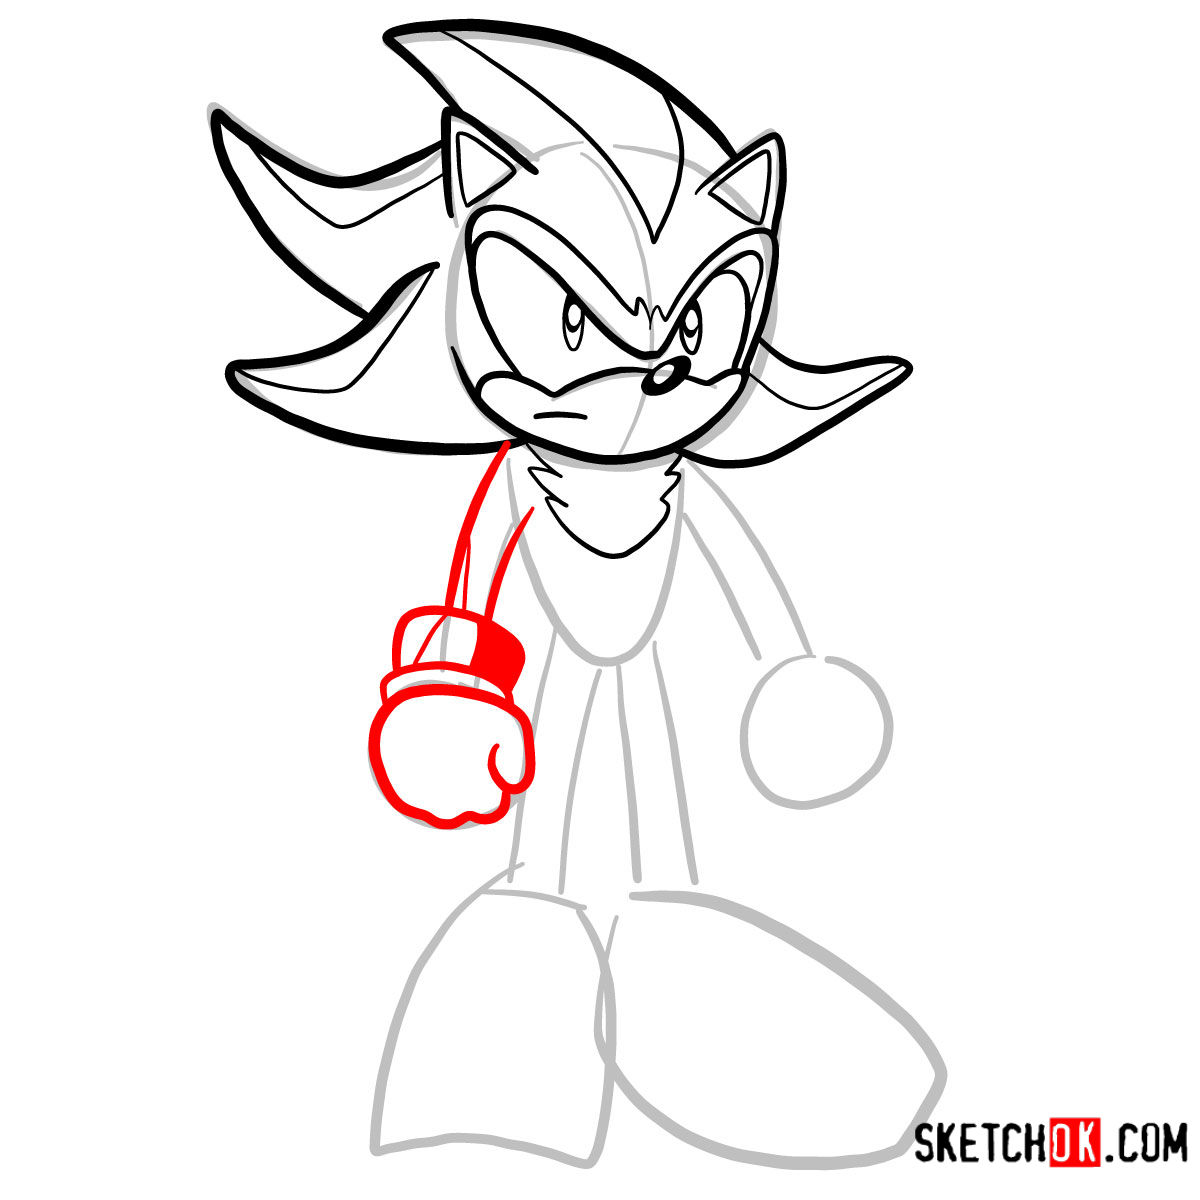 How to draw Shadow the Hedgehog - step 07